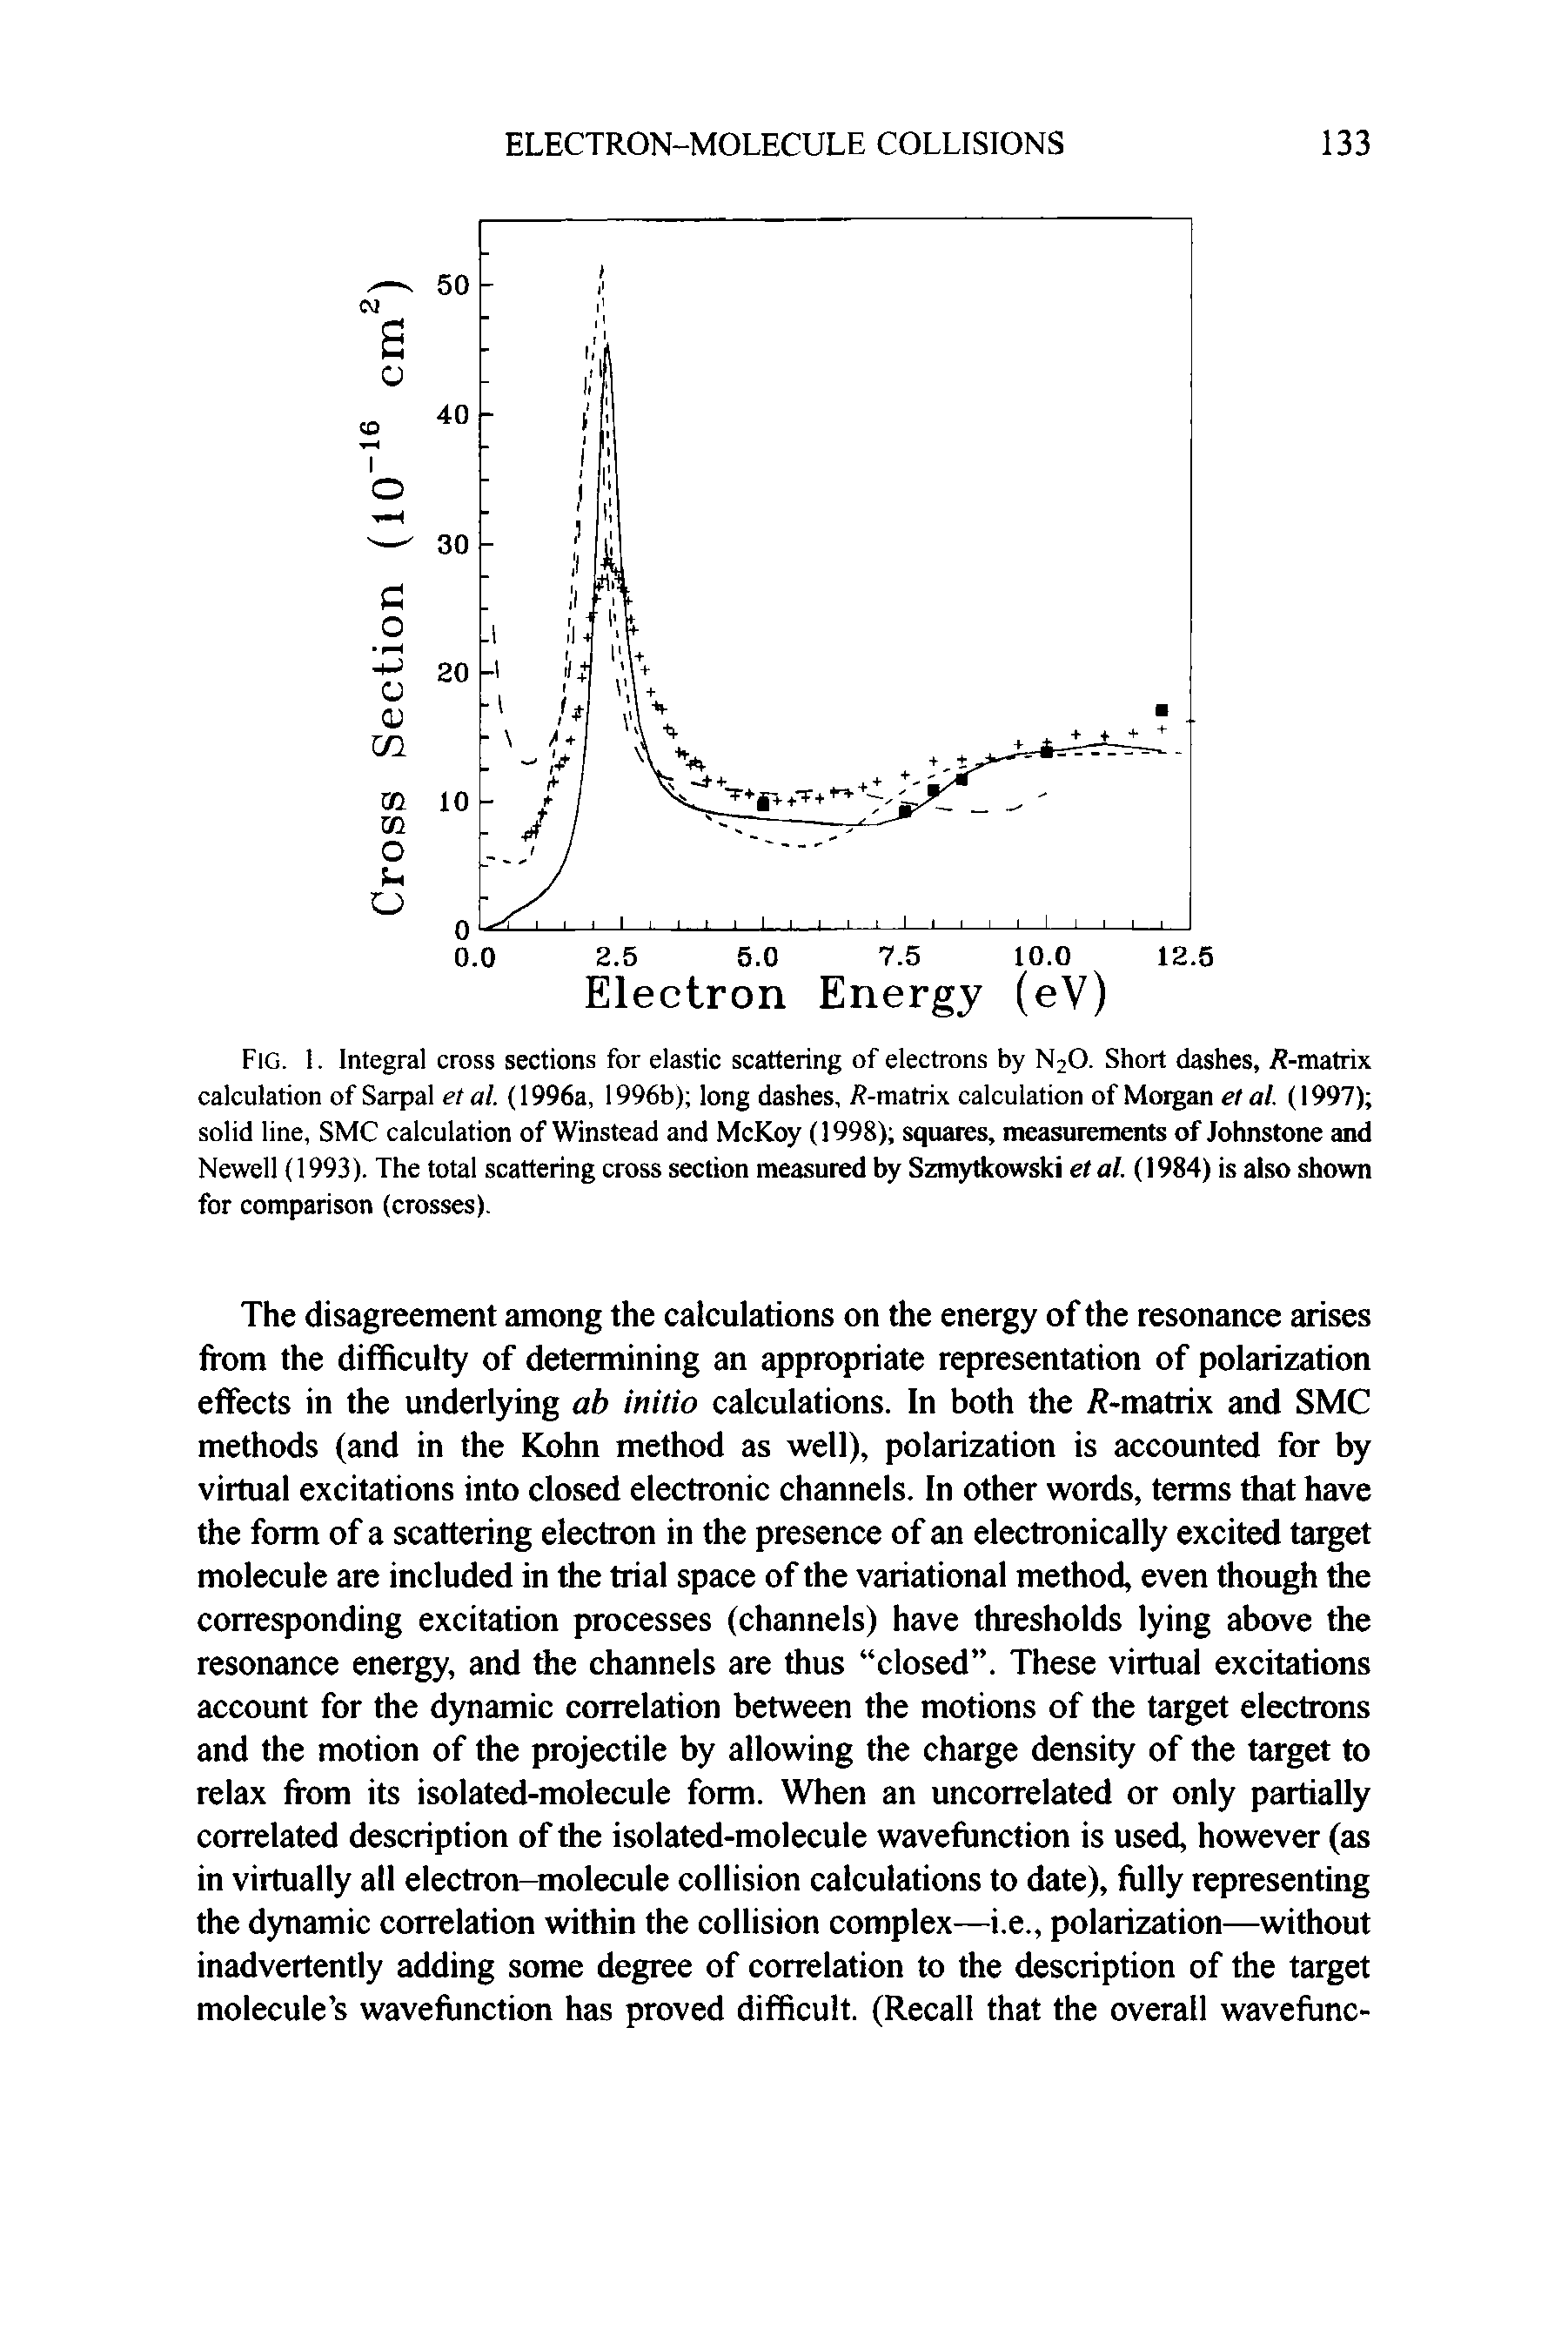 Fig. 1. Integral cross sections for elastic scattering of electrons by N2O. Short dashes, R-matrix calculation of Sarpal et al. (1996a, 1996b) long dashes, /1-matrix calculation of Morgan et al. (1997) solid line, SMC calculation of Winstead and McKoy (1998) squares, measurements of Johnstone and Newell (1993). The total scattering cross section measured by Szmytkowski etal. (1984) is also shown for comparison (crosses).